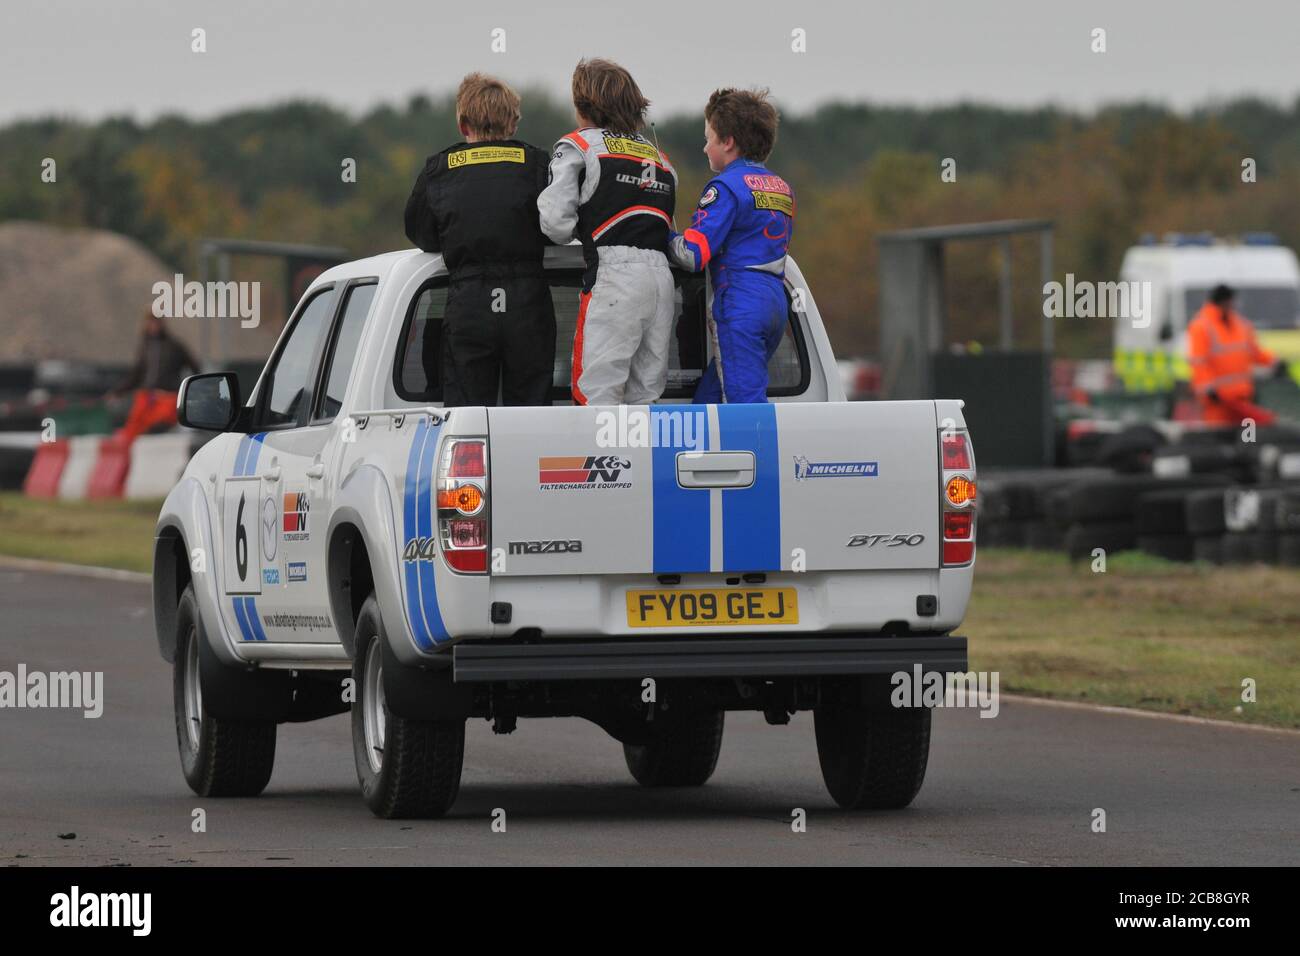 Williams F1 driver George Russell in his early Cadet Karting career. Stock Photo